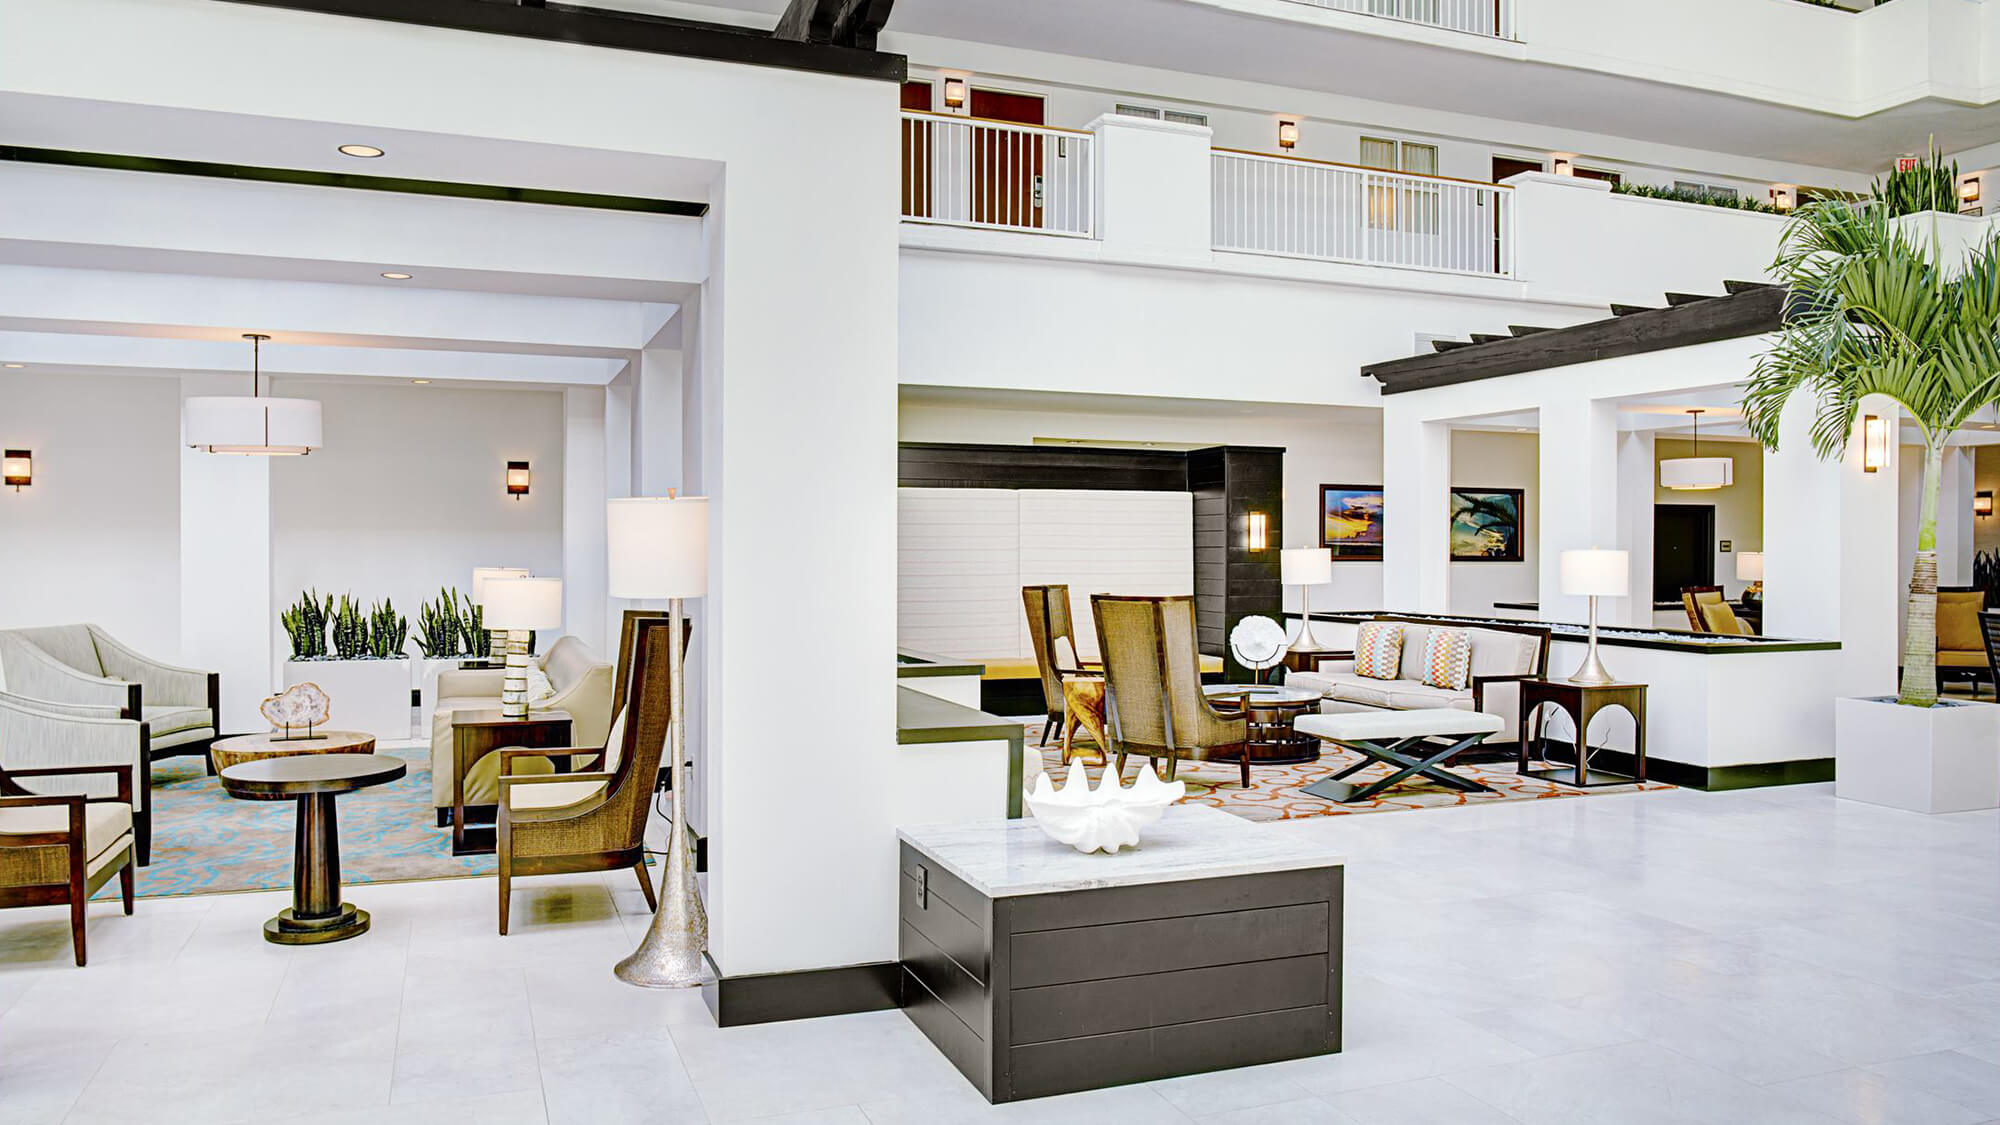 Open indoor lobby with white walls and balconies and lounge seating areas in Destin, FL